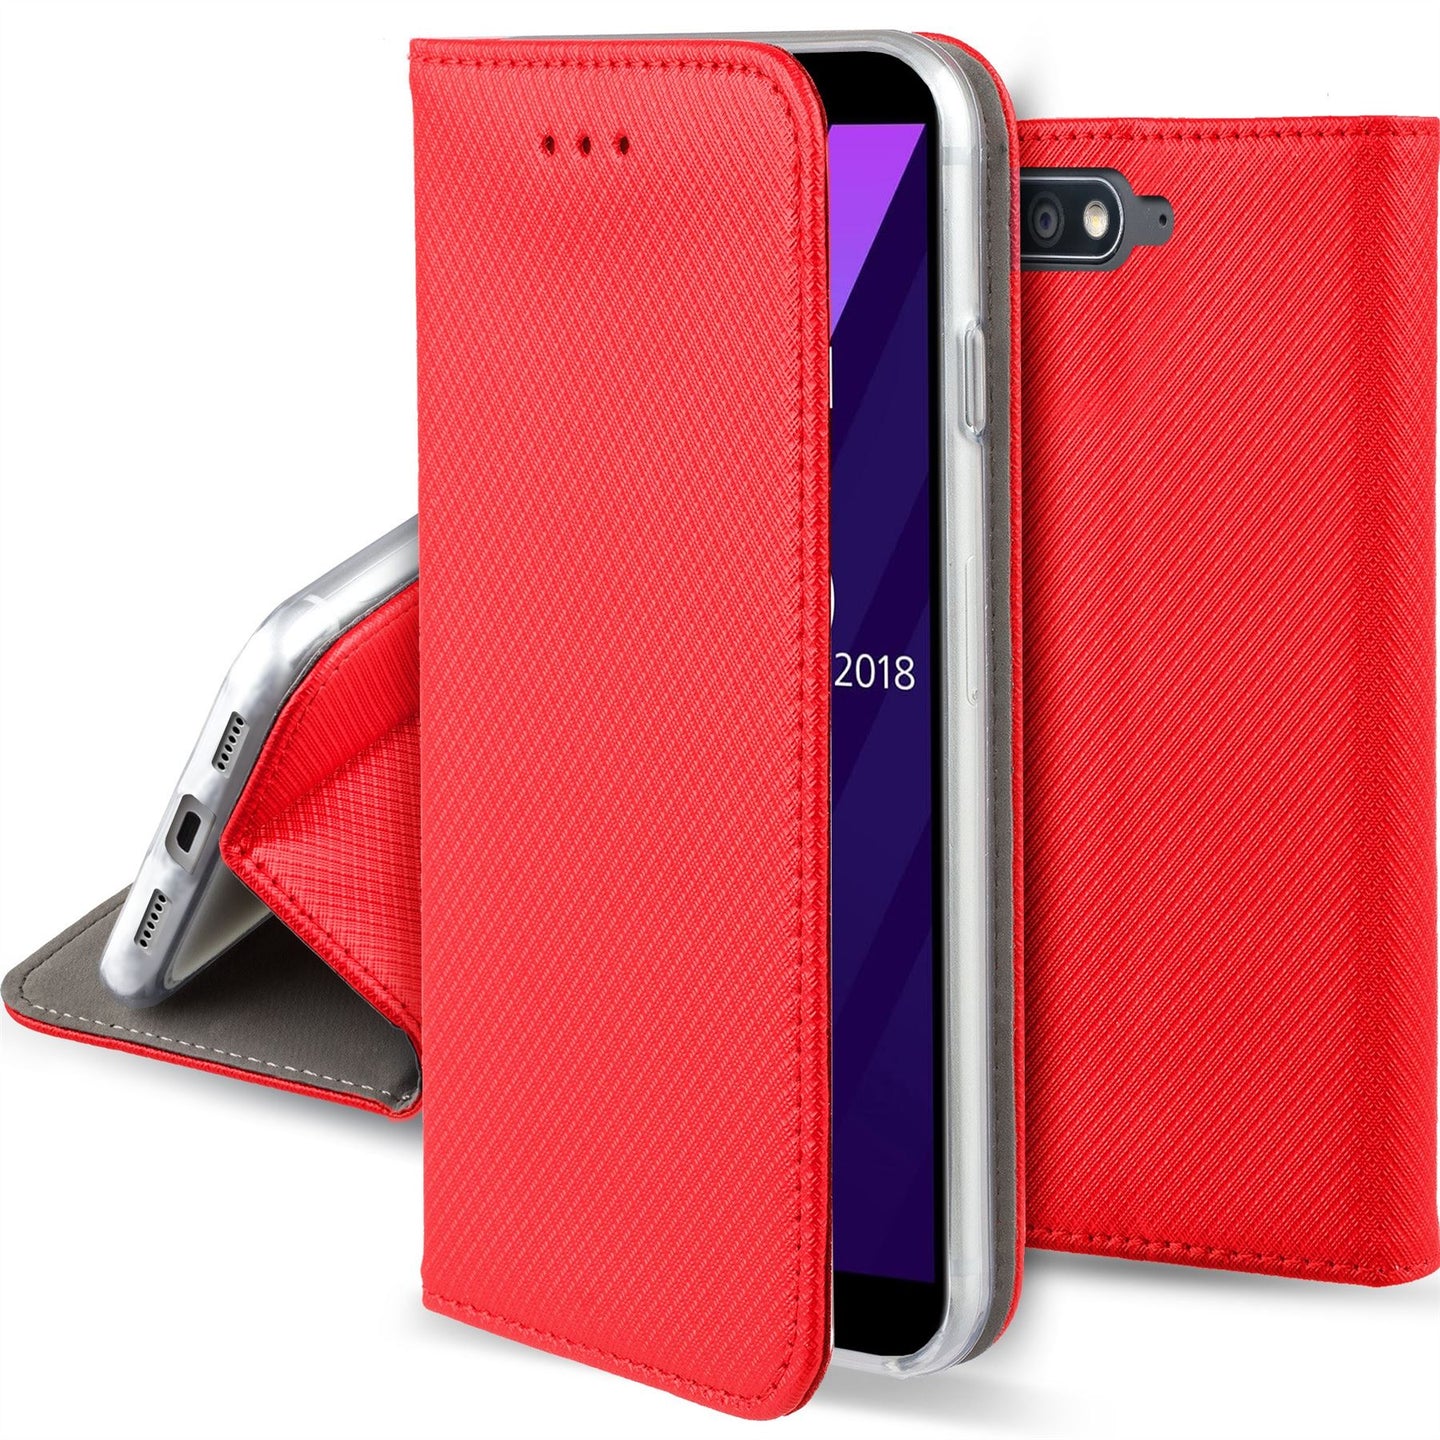 Moozy Case Flip Cover for Huawei Y6 2018, Red - Smart Magnetic Flip Case with Card Holder and Stand